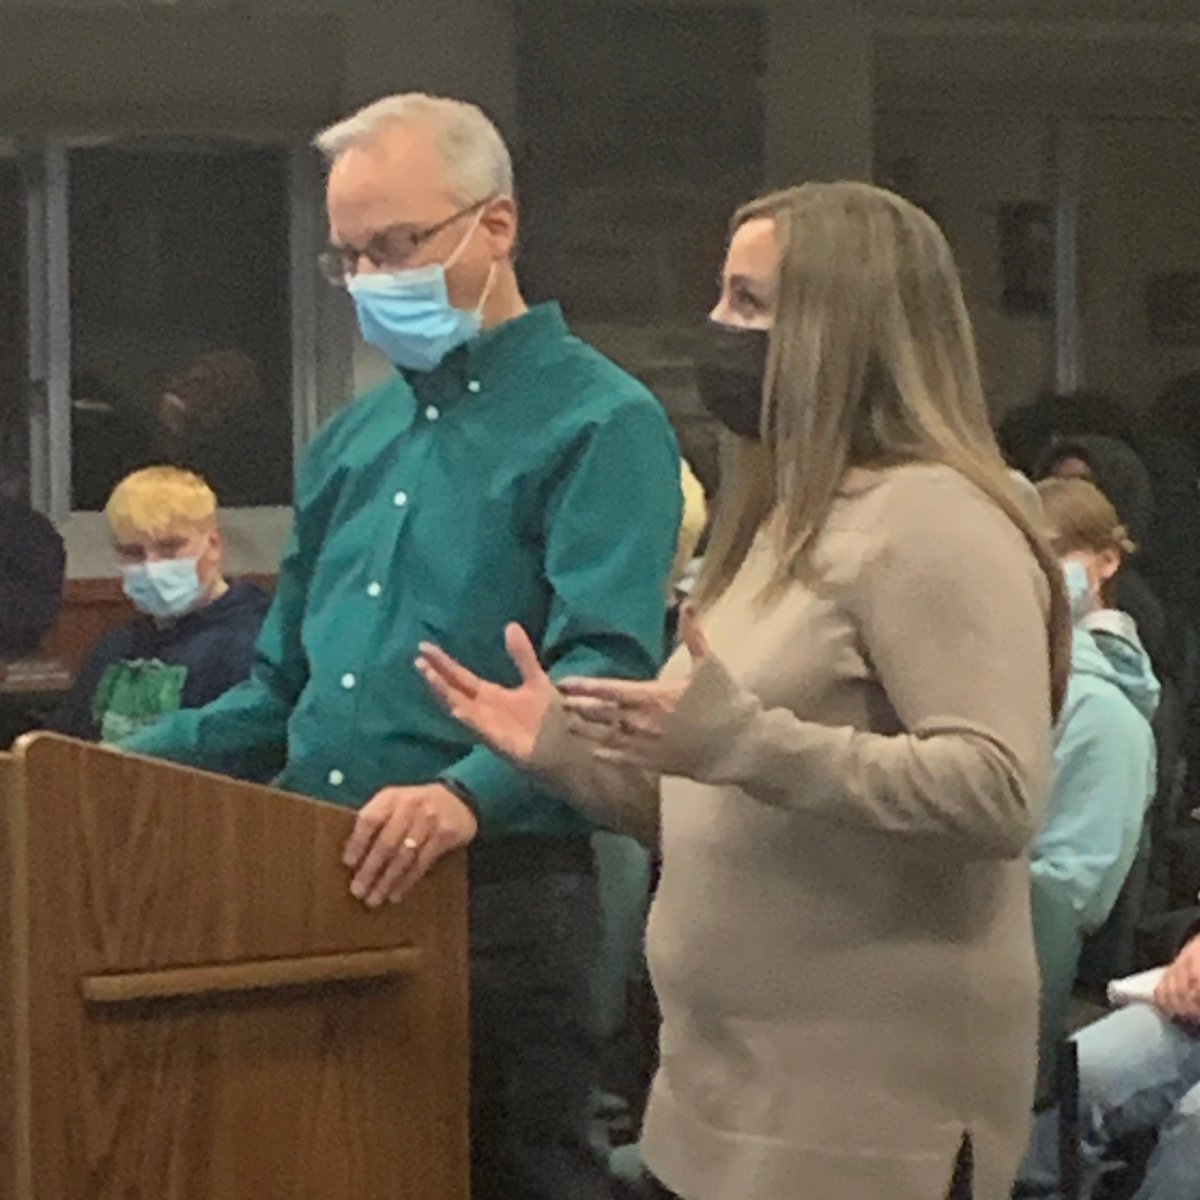 Congratulations to Miss Shanna on being a recipient of the Starfish Award from the STEA during the School Board meeting.  #starfishaward #arrowwoodeagles #stcspride #arrowwoodteachers